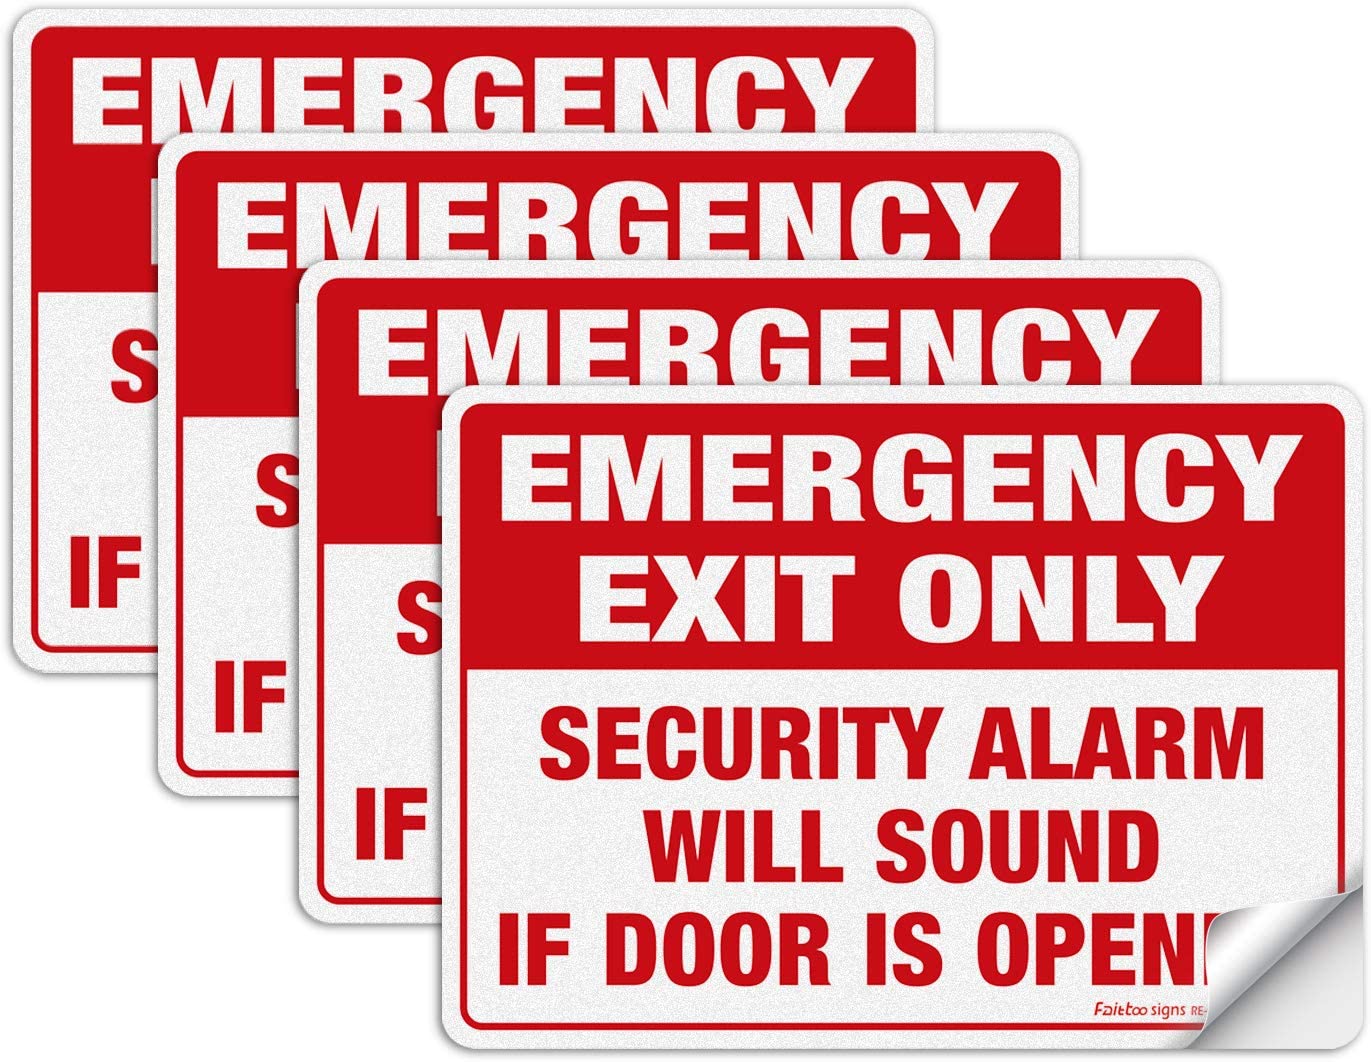 Emergency Exit Only Sticker, Emergency Exit Only - Security Alarm Will Sound If Door Is Opened Label, 10 x 7 inch Self-Adhesive Vinyl Decal Stickers, Reflective, UV Protected, Waterproof